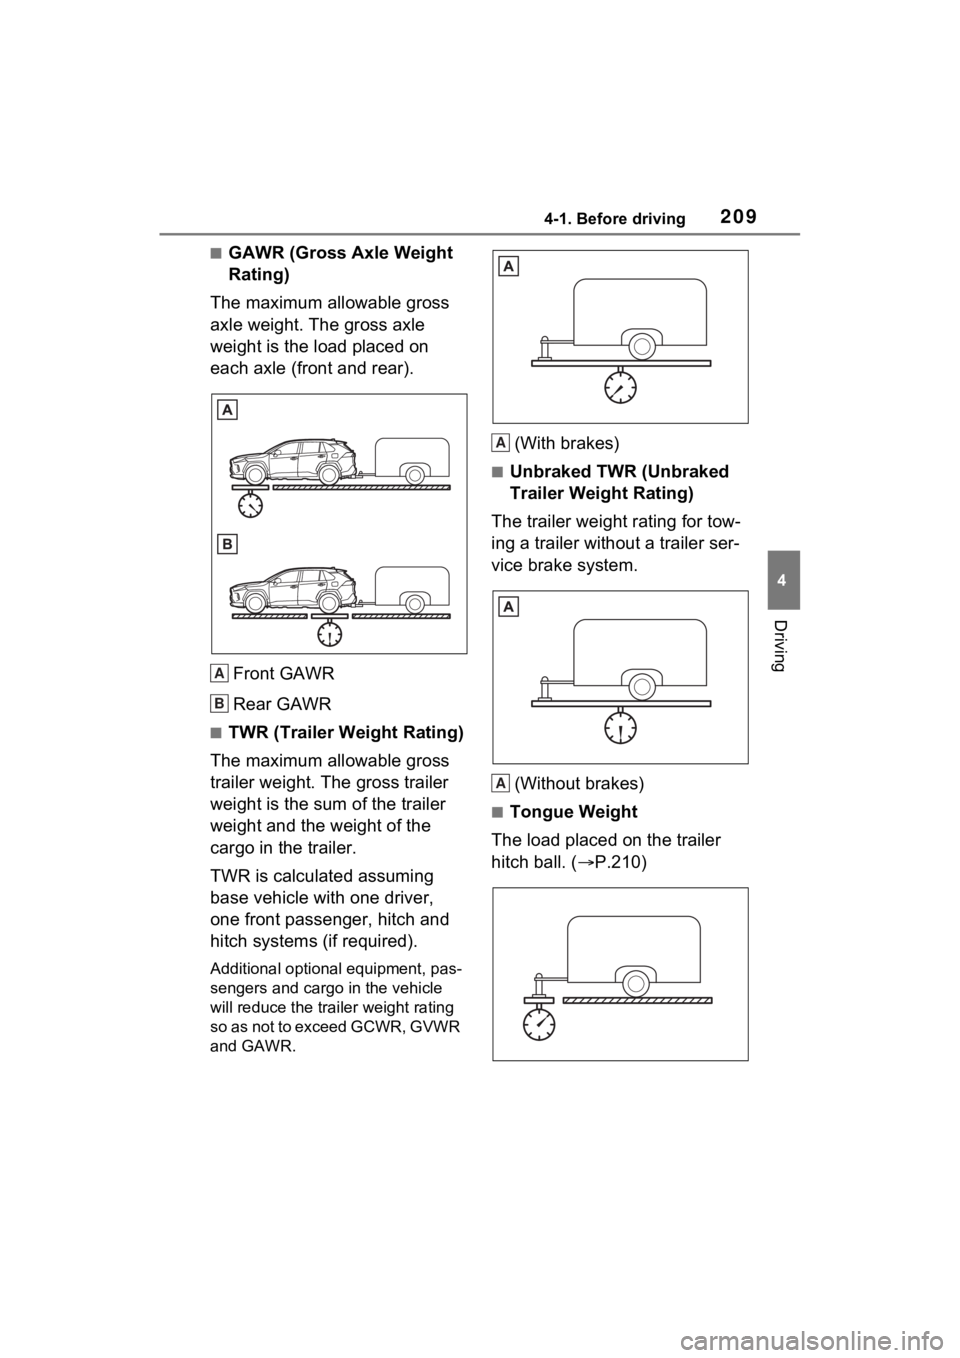 TOYOTA RAV4 HYBRID 2023  Owners Manual 2094-1. Before driving
4
Driving
■GAWR (Gross Axle Weight 
Rating)
The maximum allowable gross 
axle weight. The gross axle 
weight is the load placed on 
each axle (front and rear).
Front GAWR
Rear